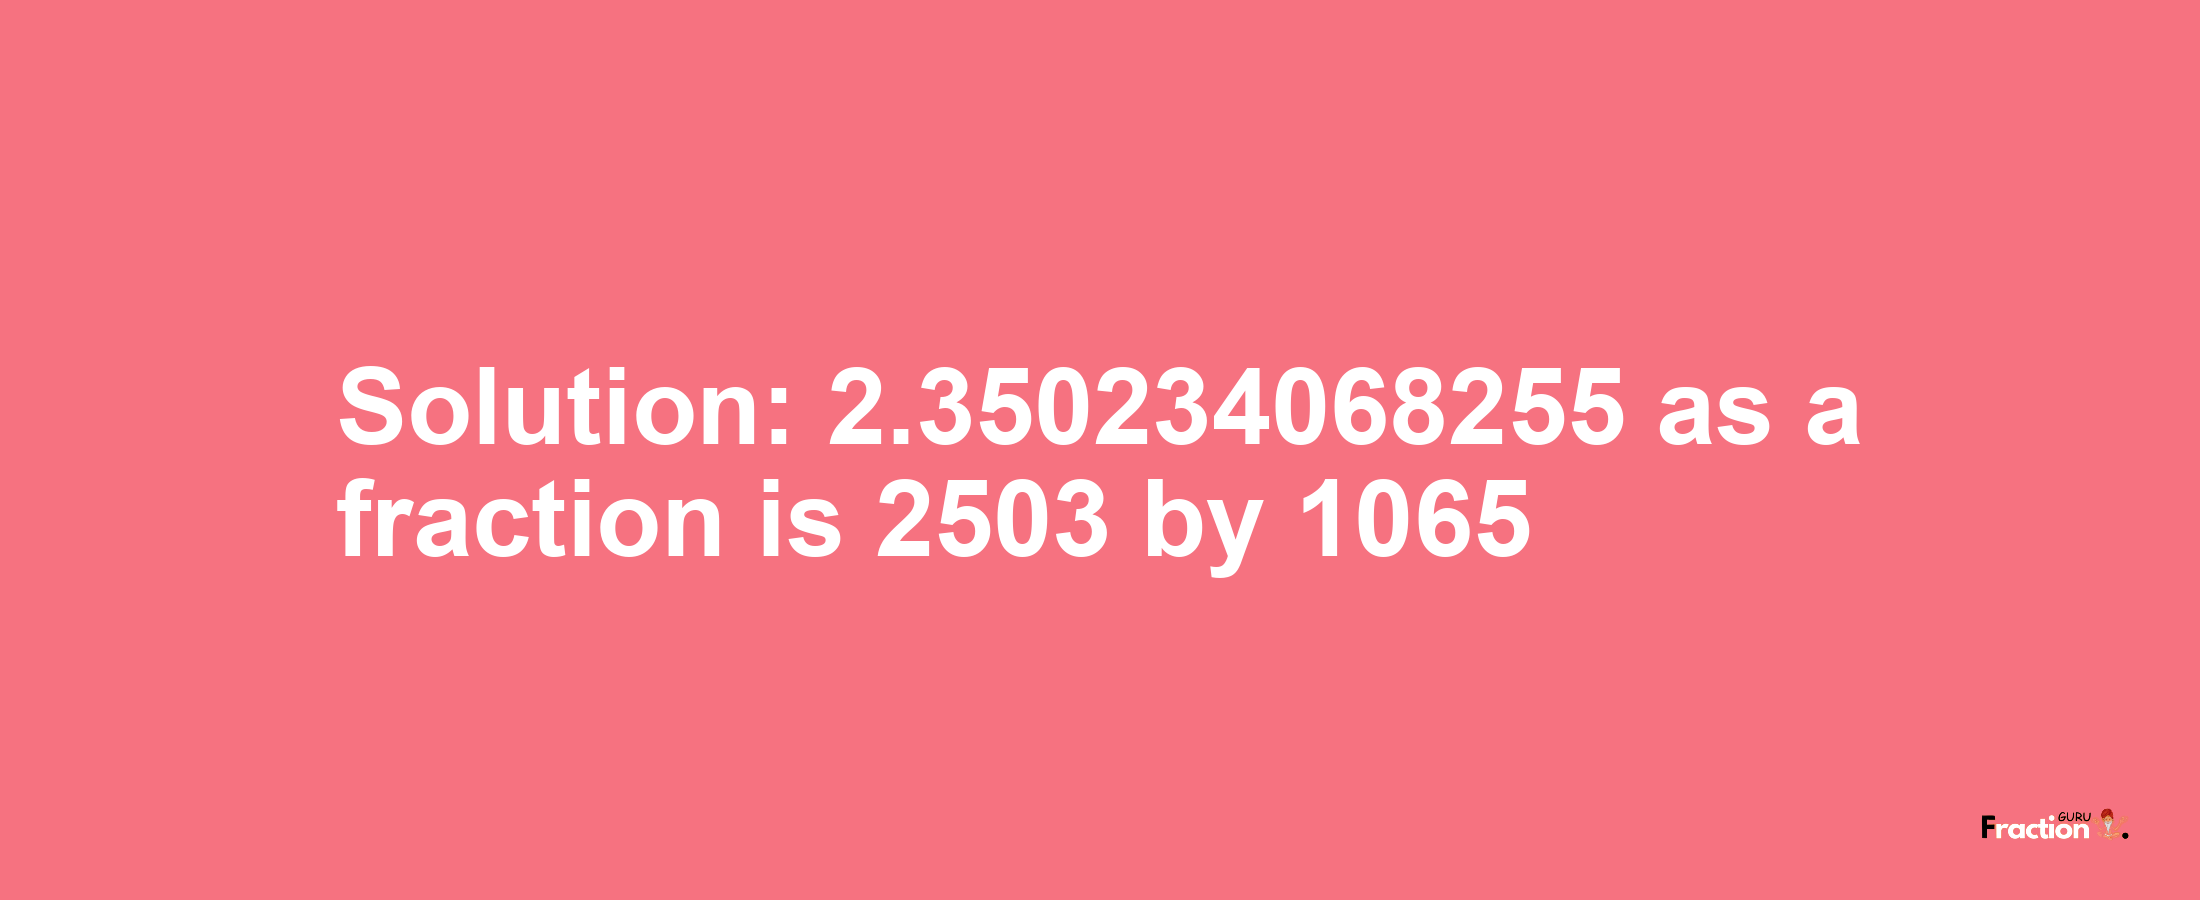 Solution:2.350234068255 as a fraction is 2503/1065